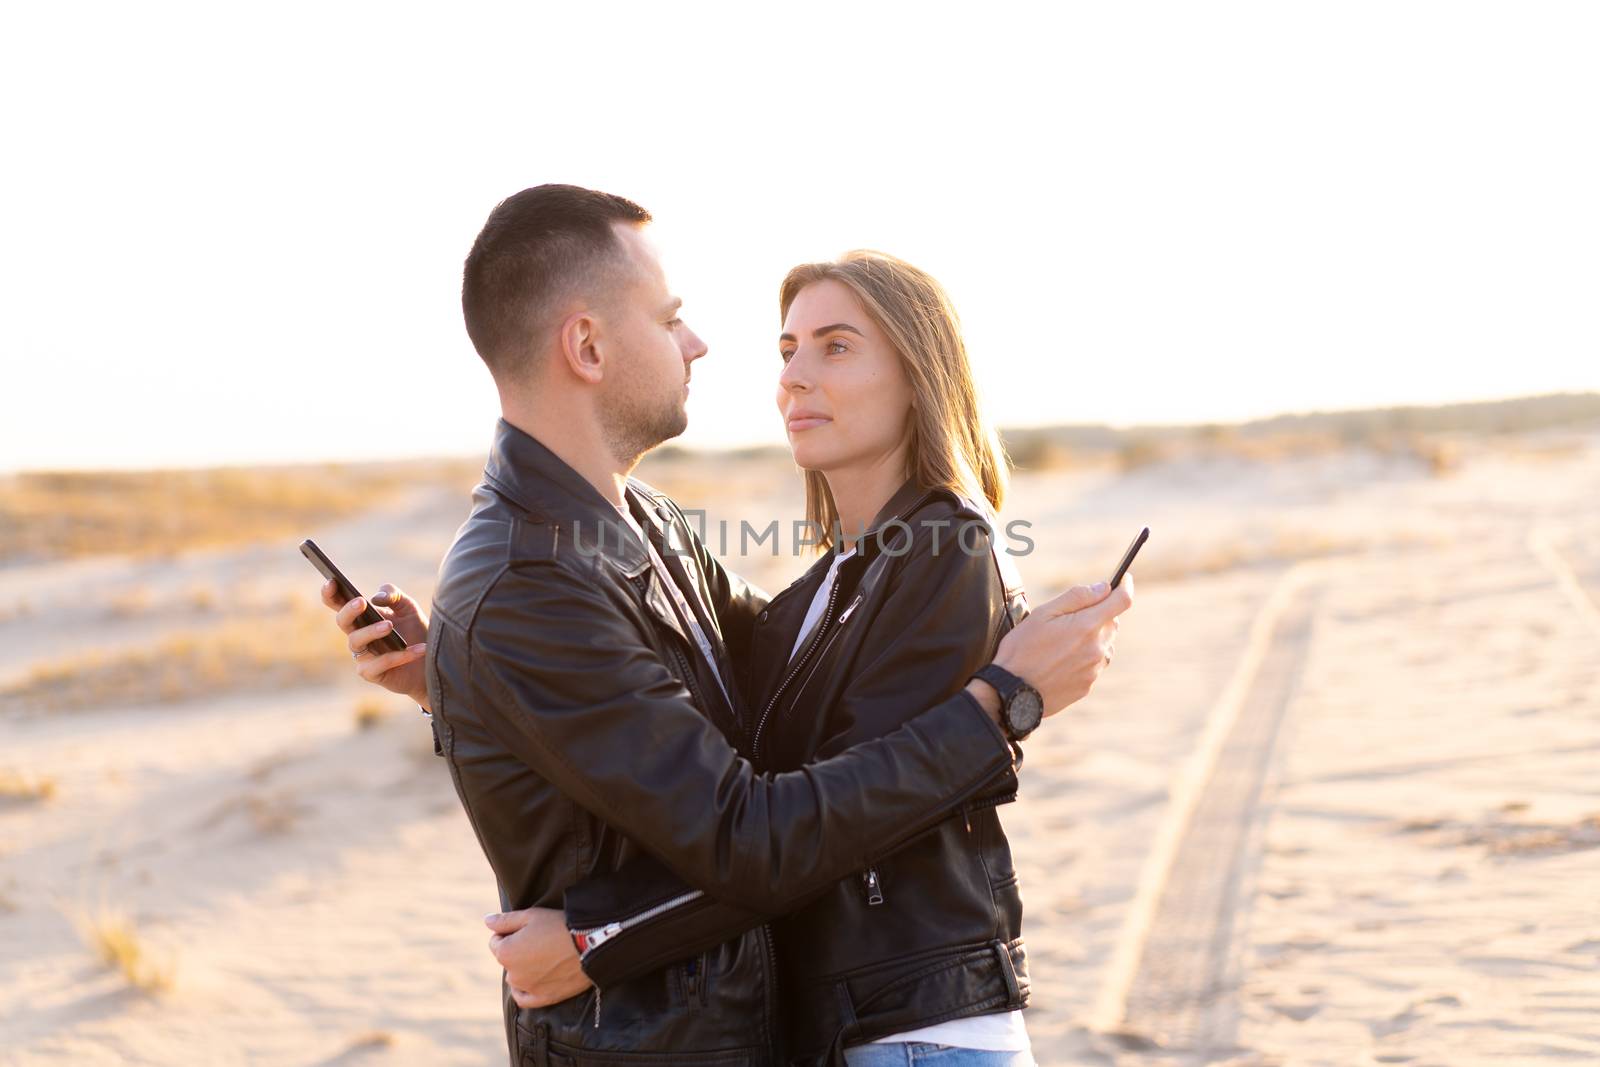 Happy and cute adorable adult couple leather jacket and jeans man with woman girlfriend walking Concept about how mobile phones social networks and the Internet affects the relationship between people